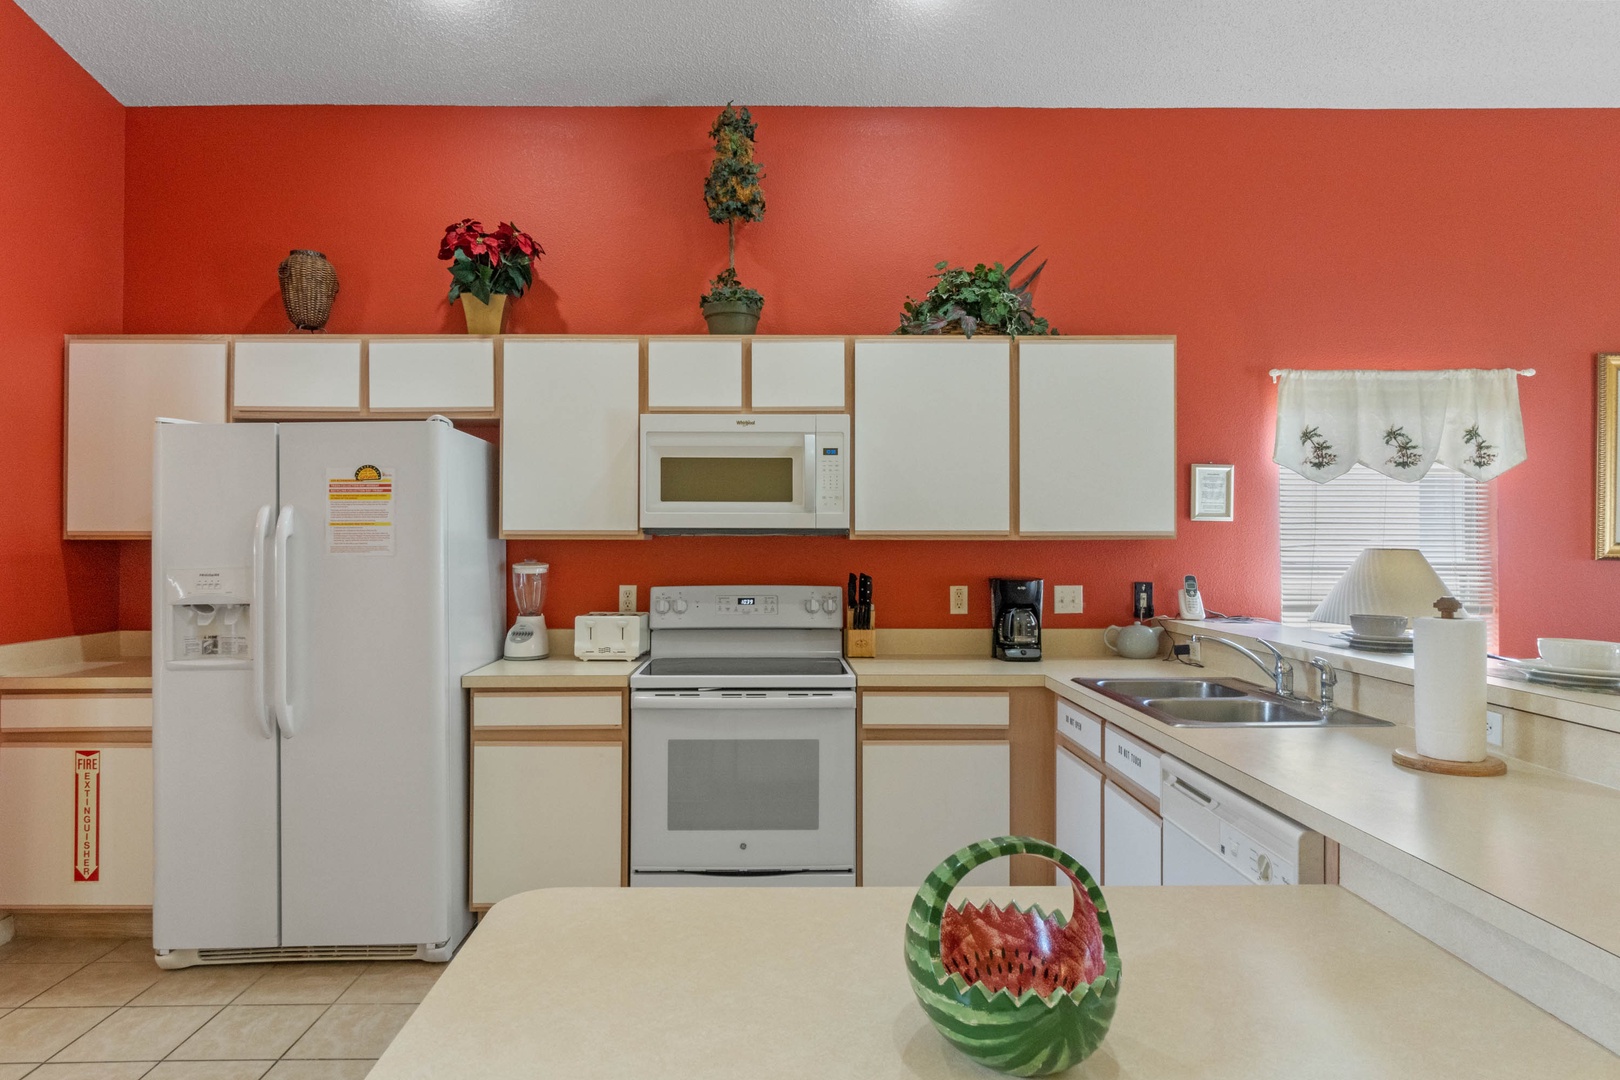 Full kitchen equipped with coffee machine, blender, toaster & more!